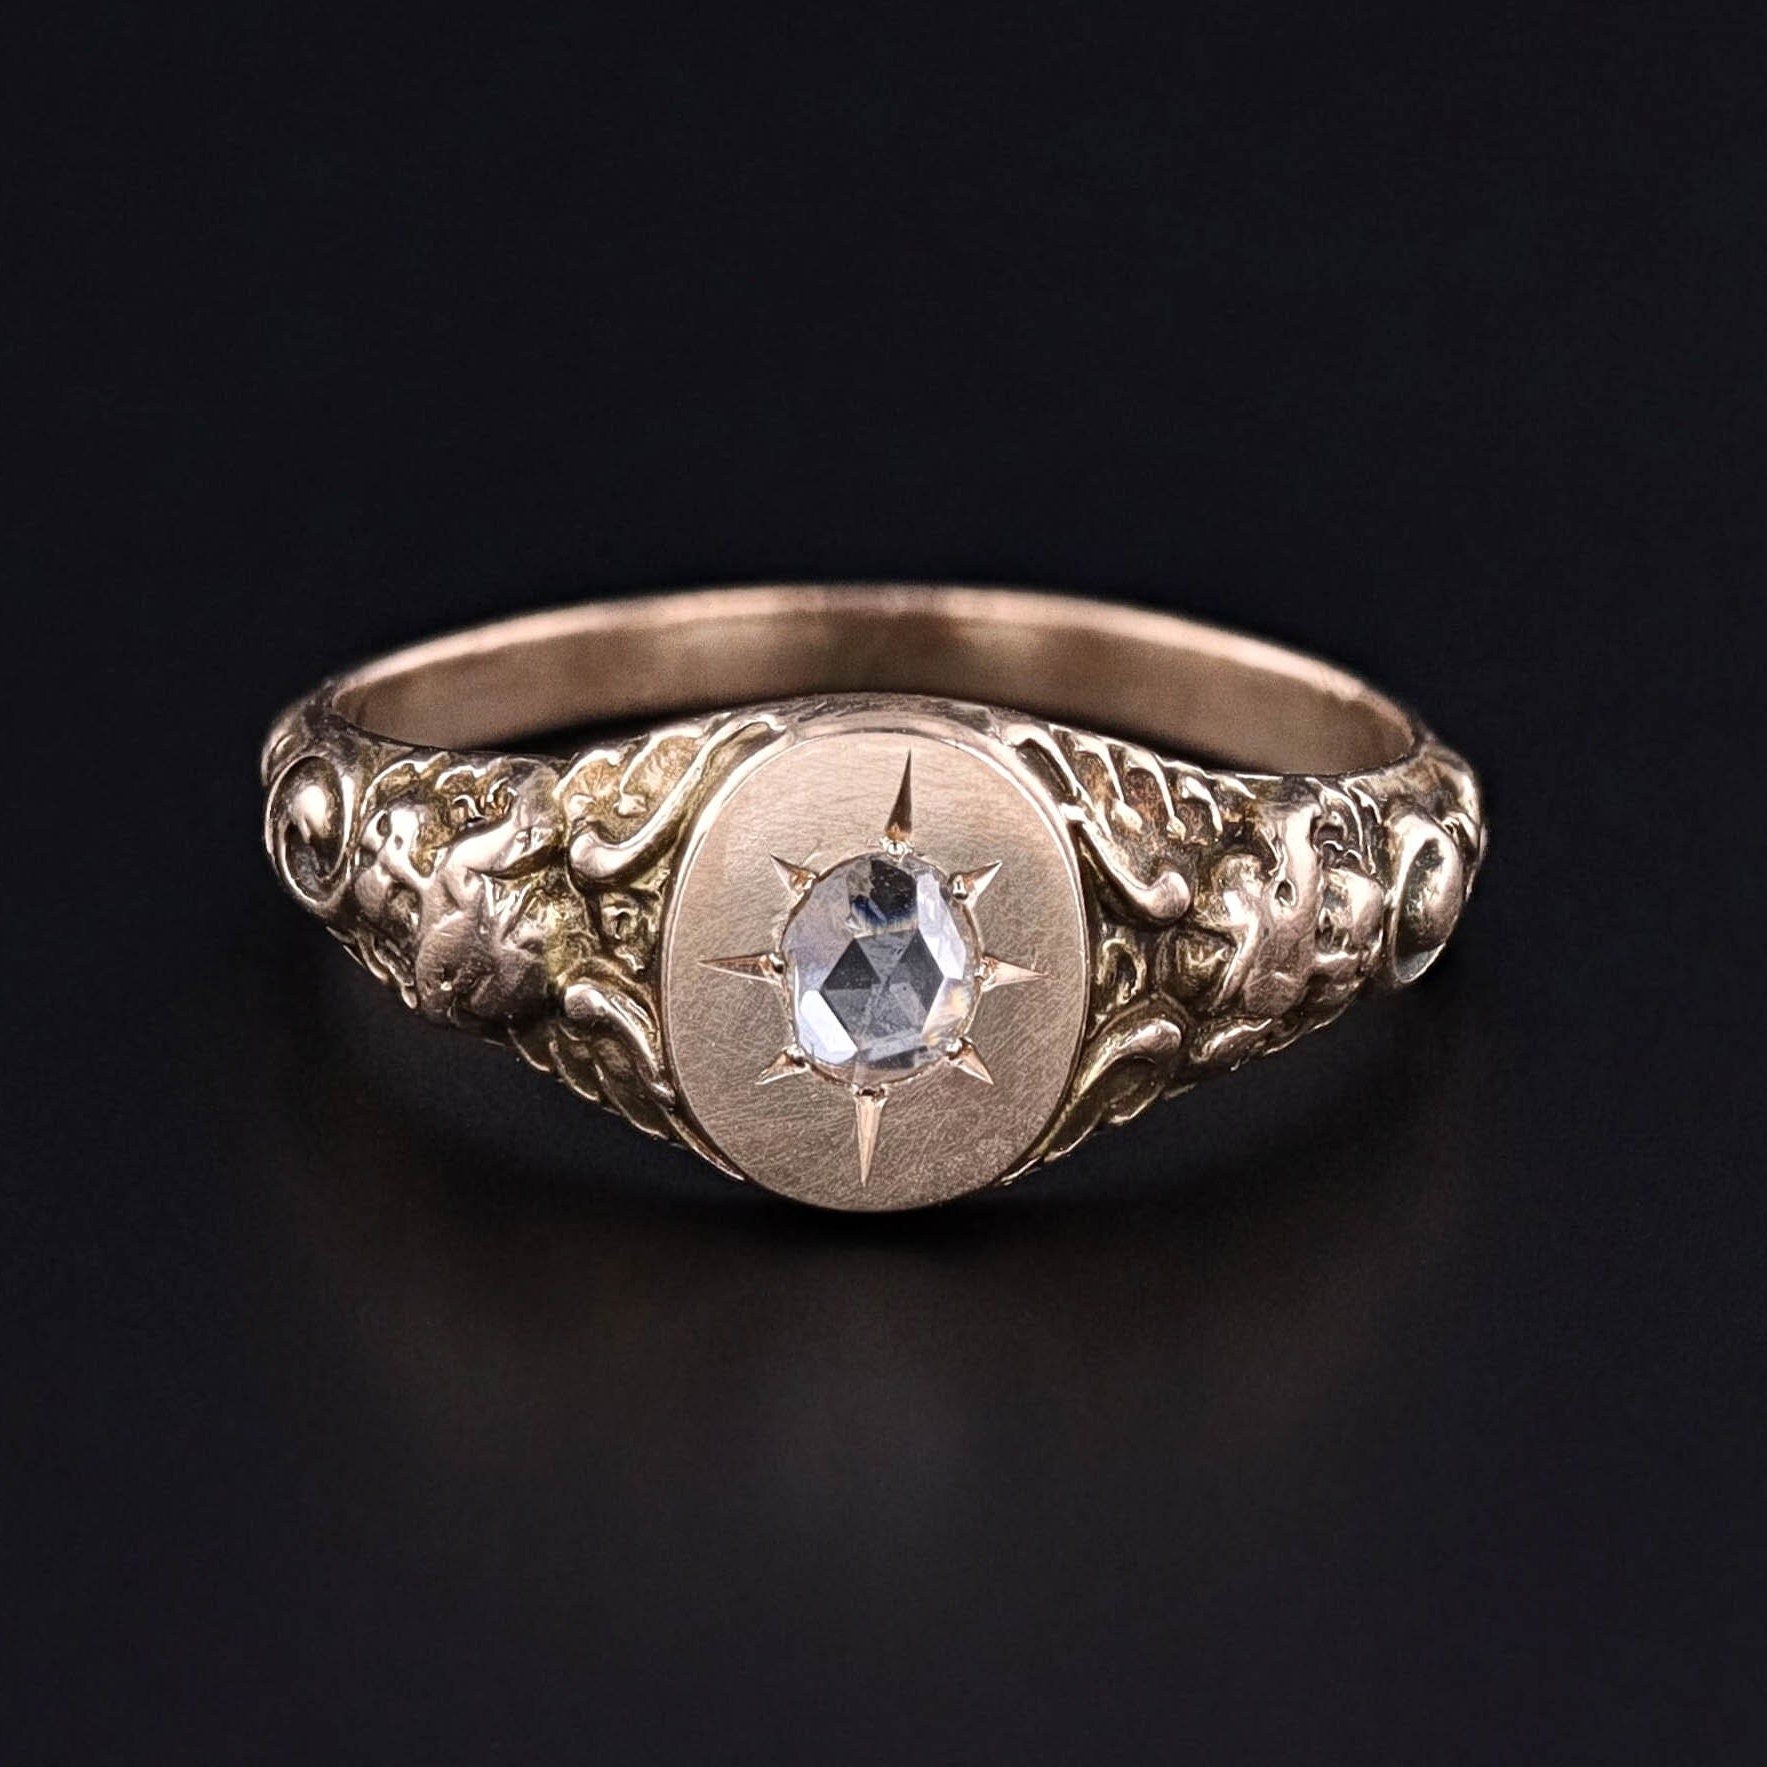 An antique diamond cherub ring of 10k gold. The ring is gypsy set with a rose cut diamond in a hand engraved star pattern. Perfect for any cherub jewelry collector or antique jewelry lover.